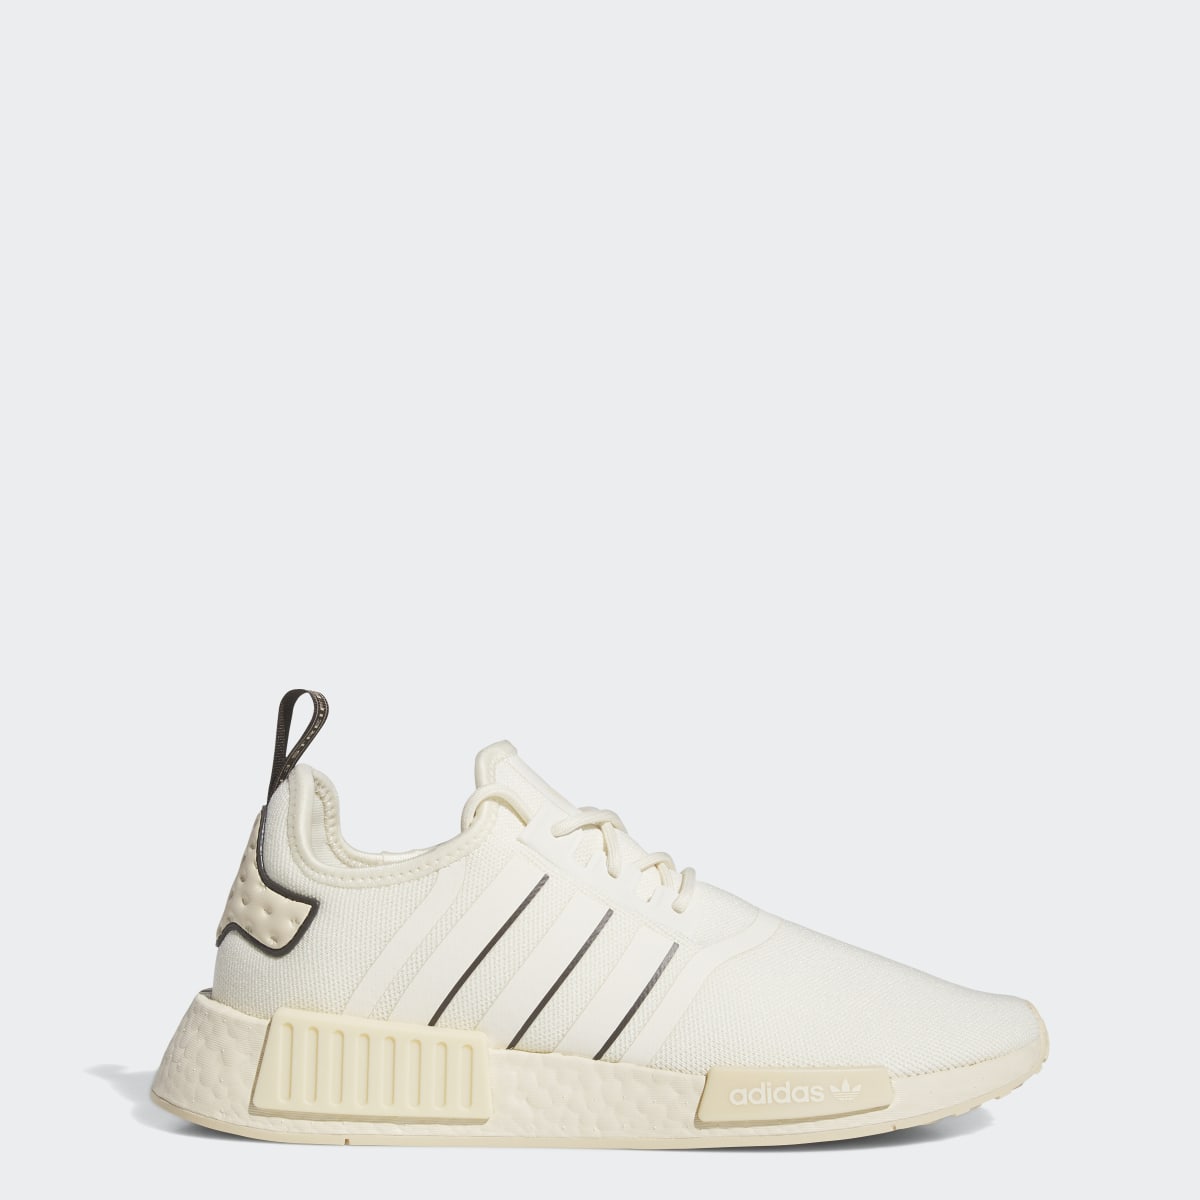 NMD_R1 Low Trainers